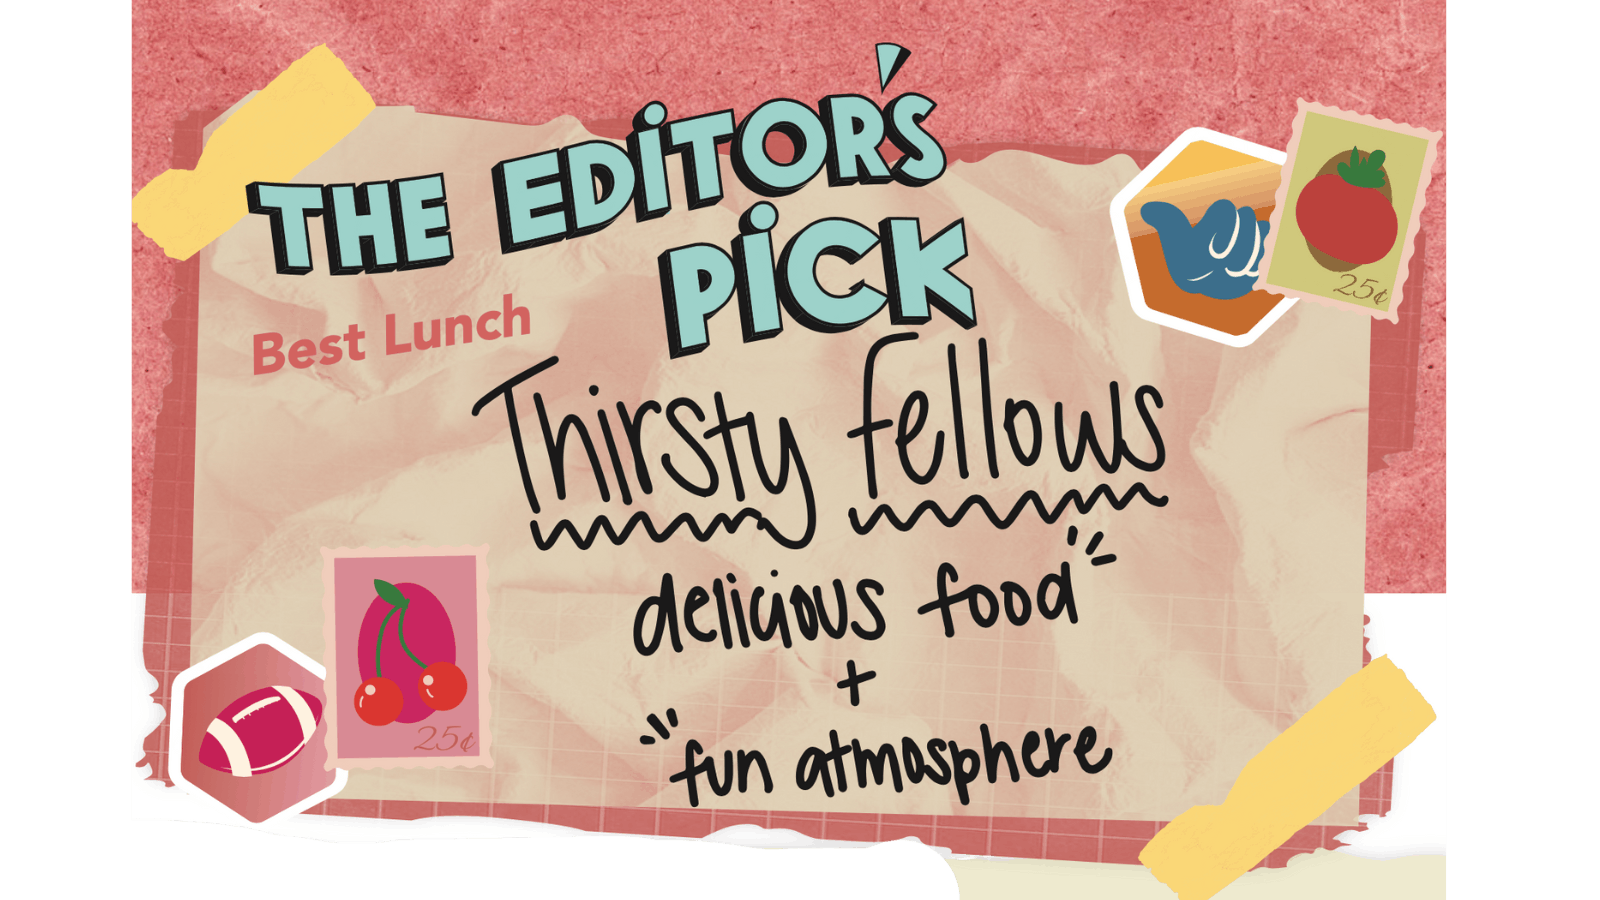 Photo for Editor's Pick, Best Lunch: Thirsty Fellows